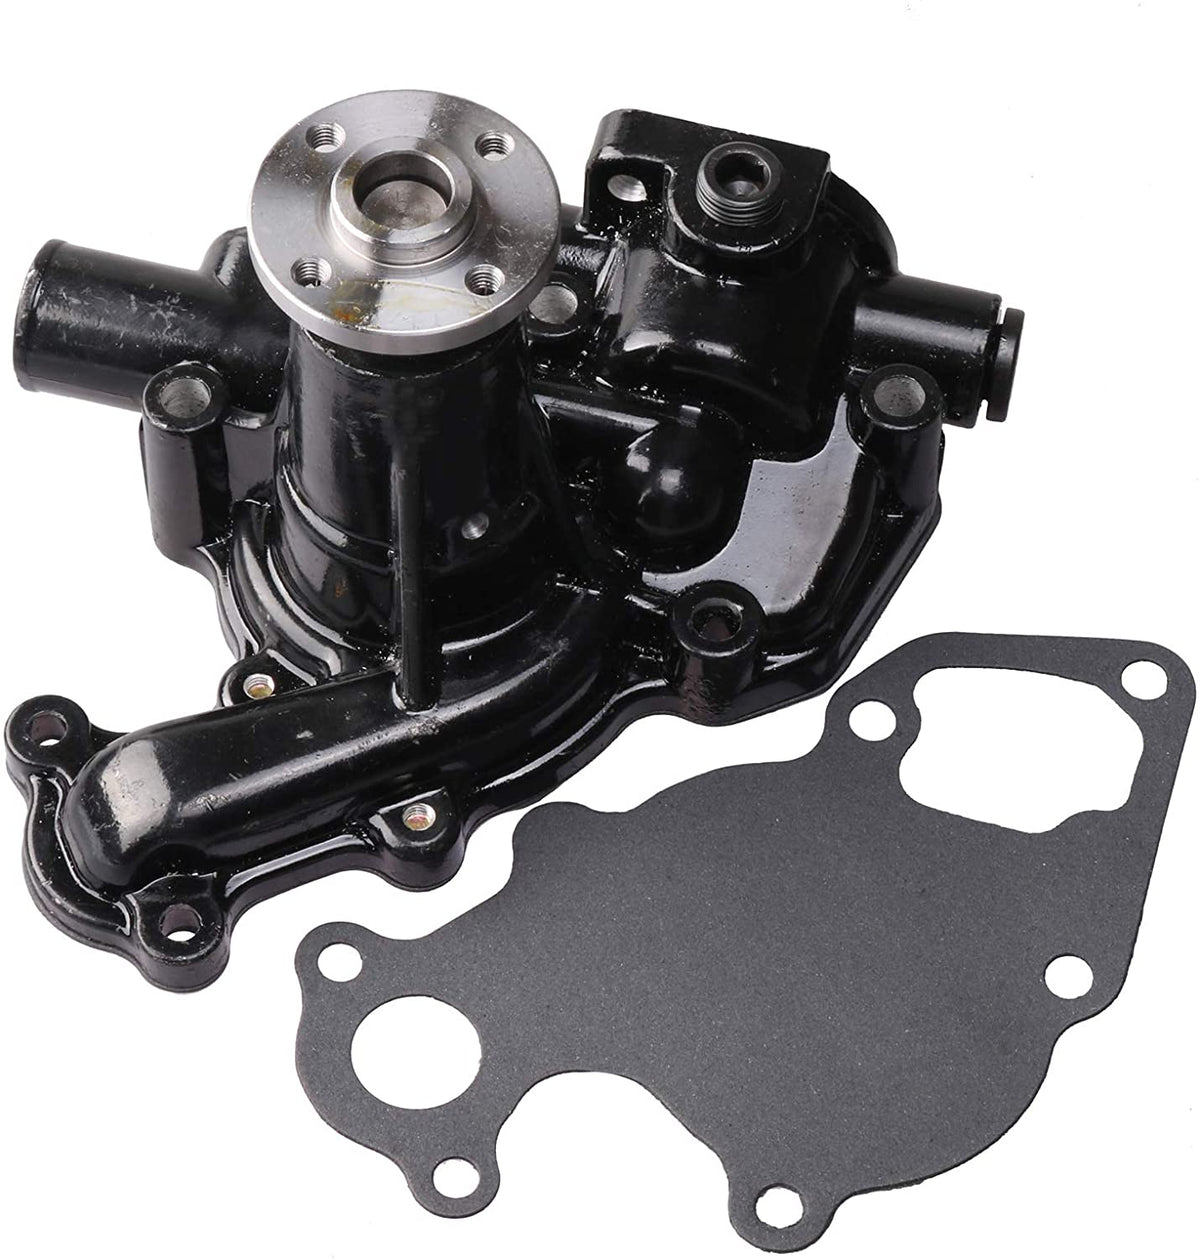 Water Pump AM878192 MIA880036 with Gaskets for John Deere 655 755 756 855 Compact Tractor F1145 1445 1545 4200 4210 Front Mower - KUDUPARTS